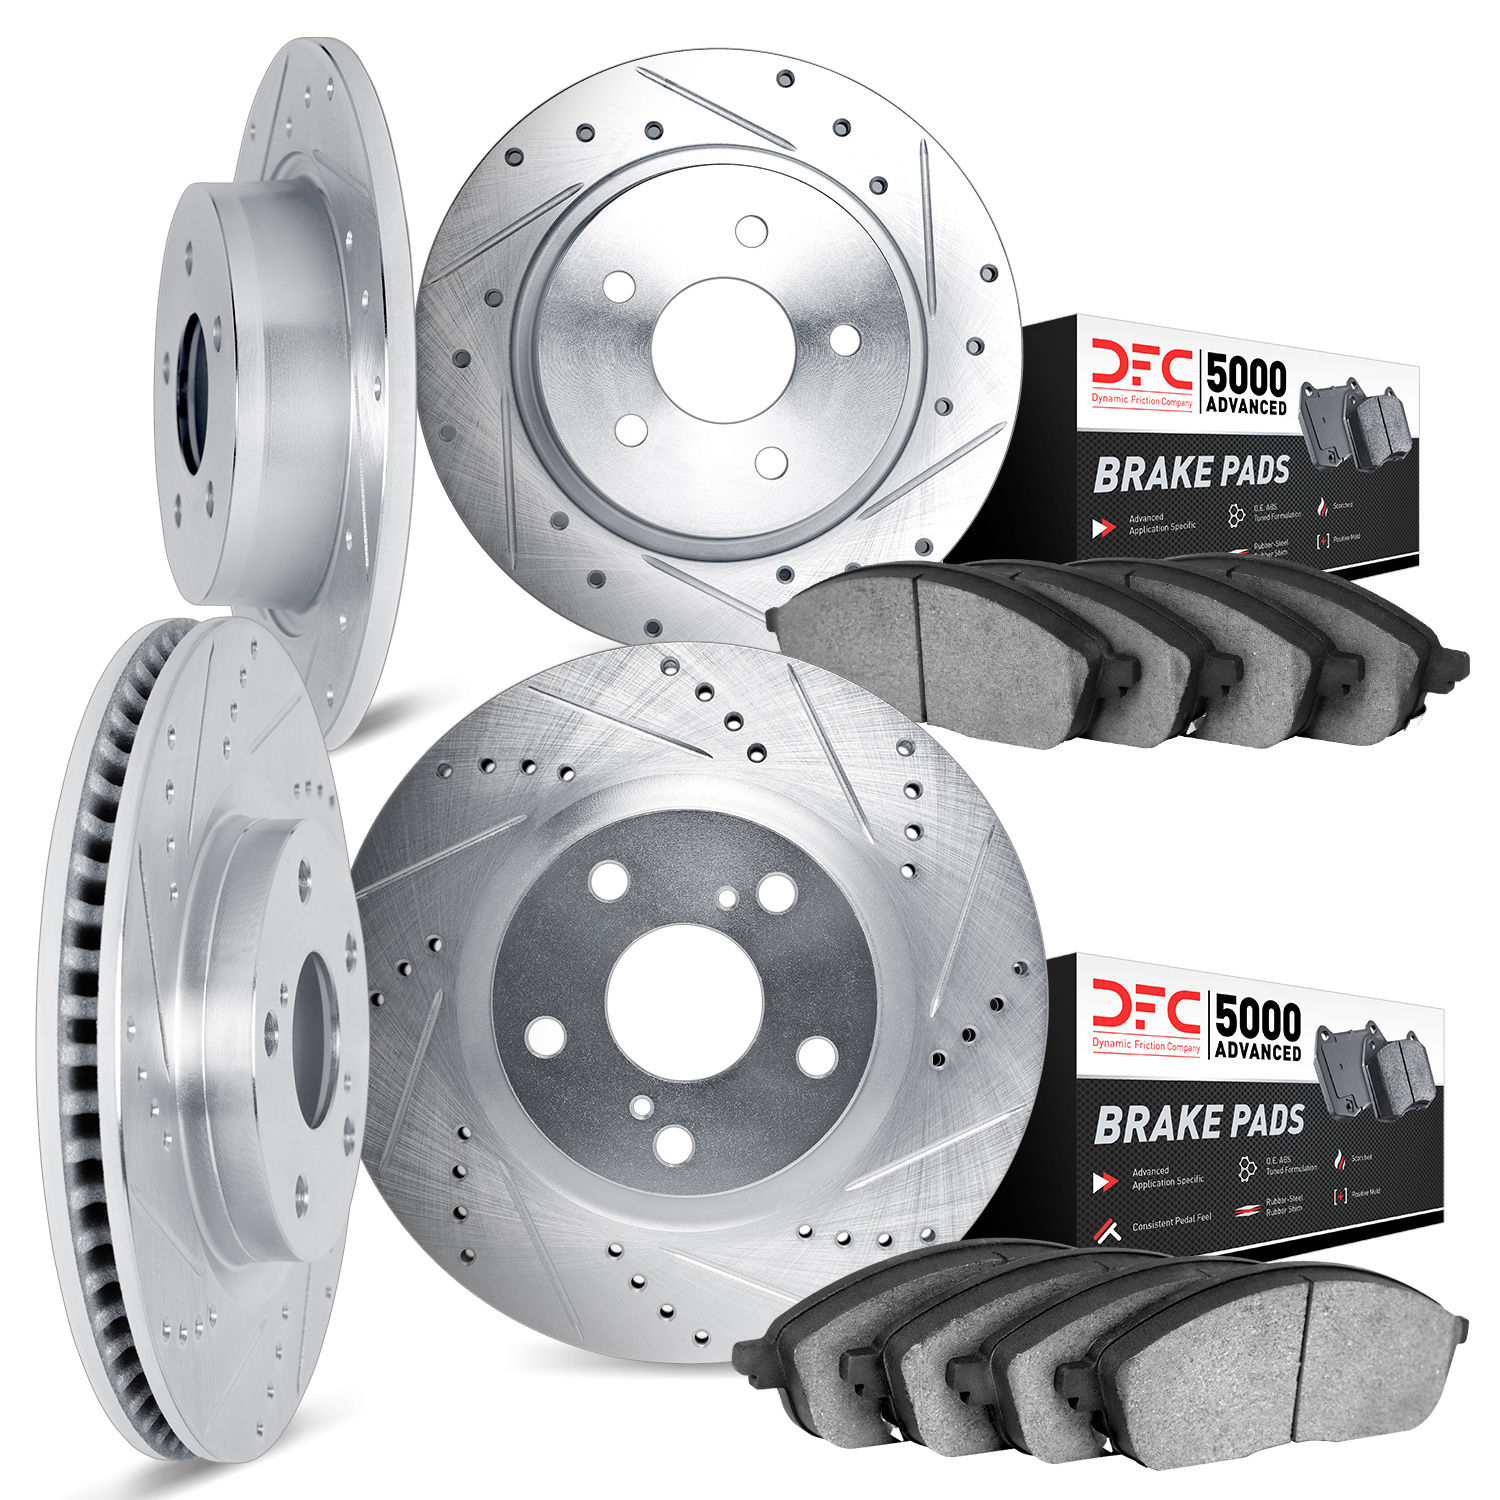 7504-54346 Drilled/Slotted Brake Rotors w/5000 Advanced Brake Pads Kit [Silver], 2002-2005 Ford/Lincoln/Mercury/Mazda, Position: